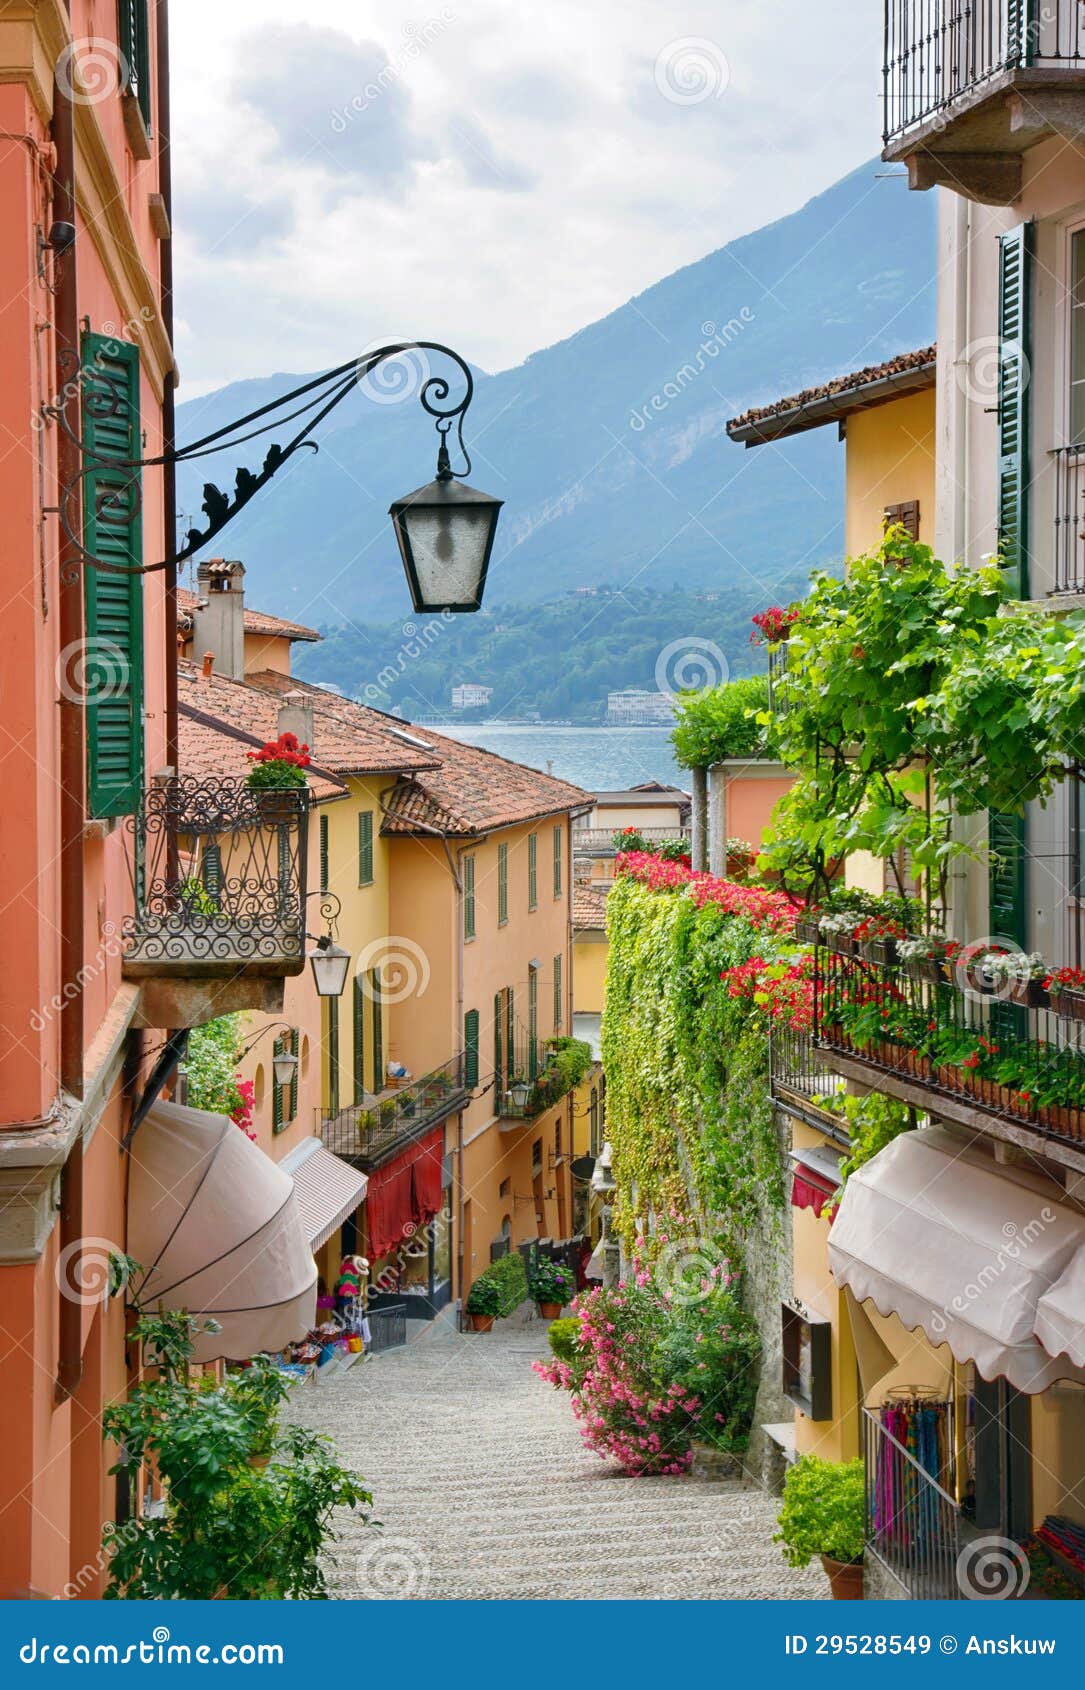 picturesque small town street view in lake como italy